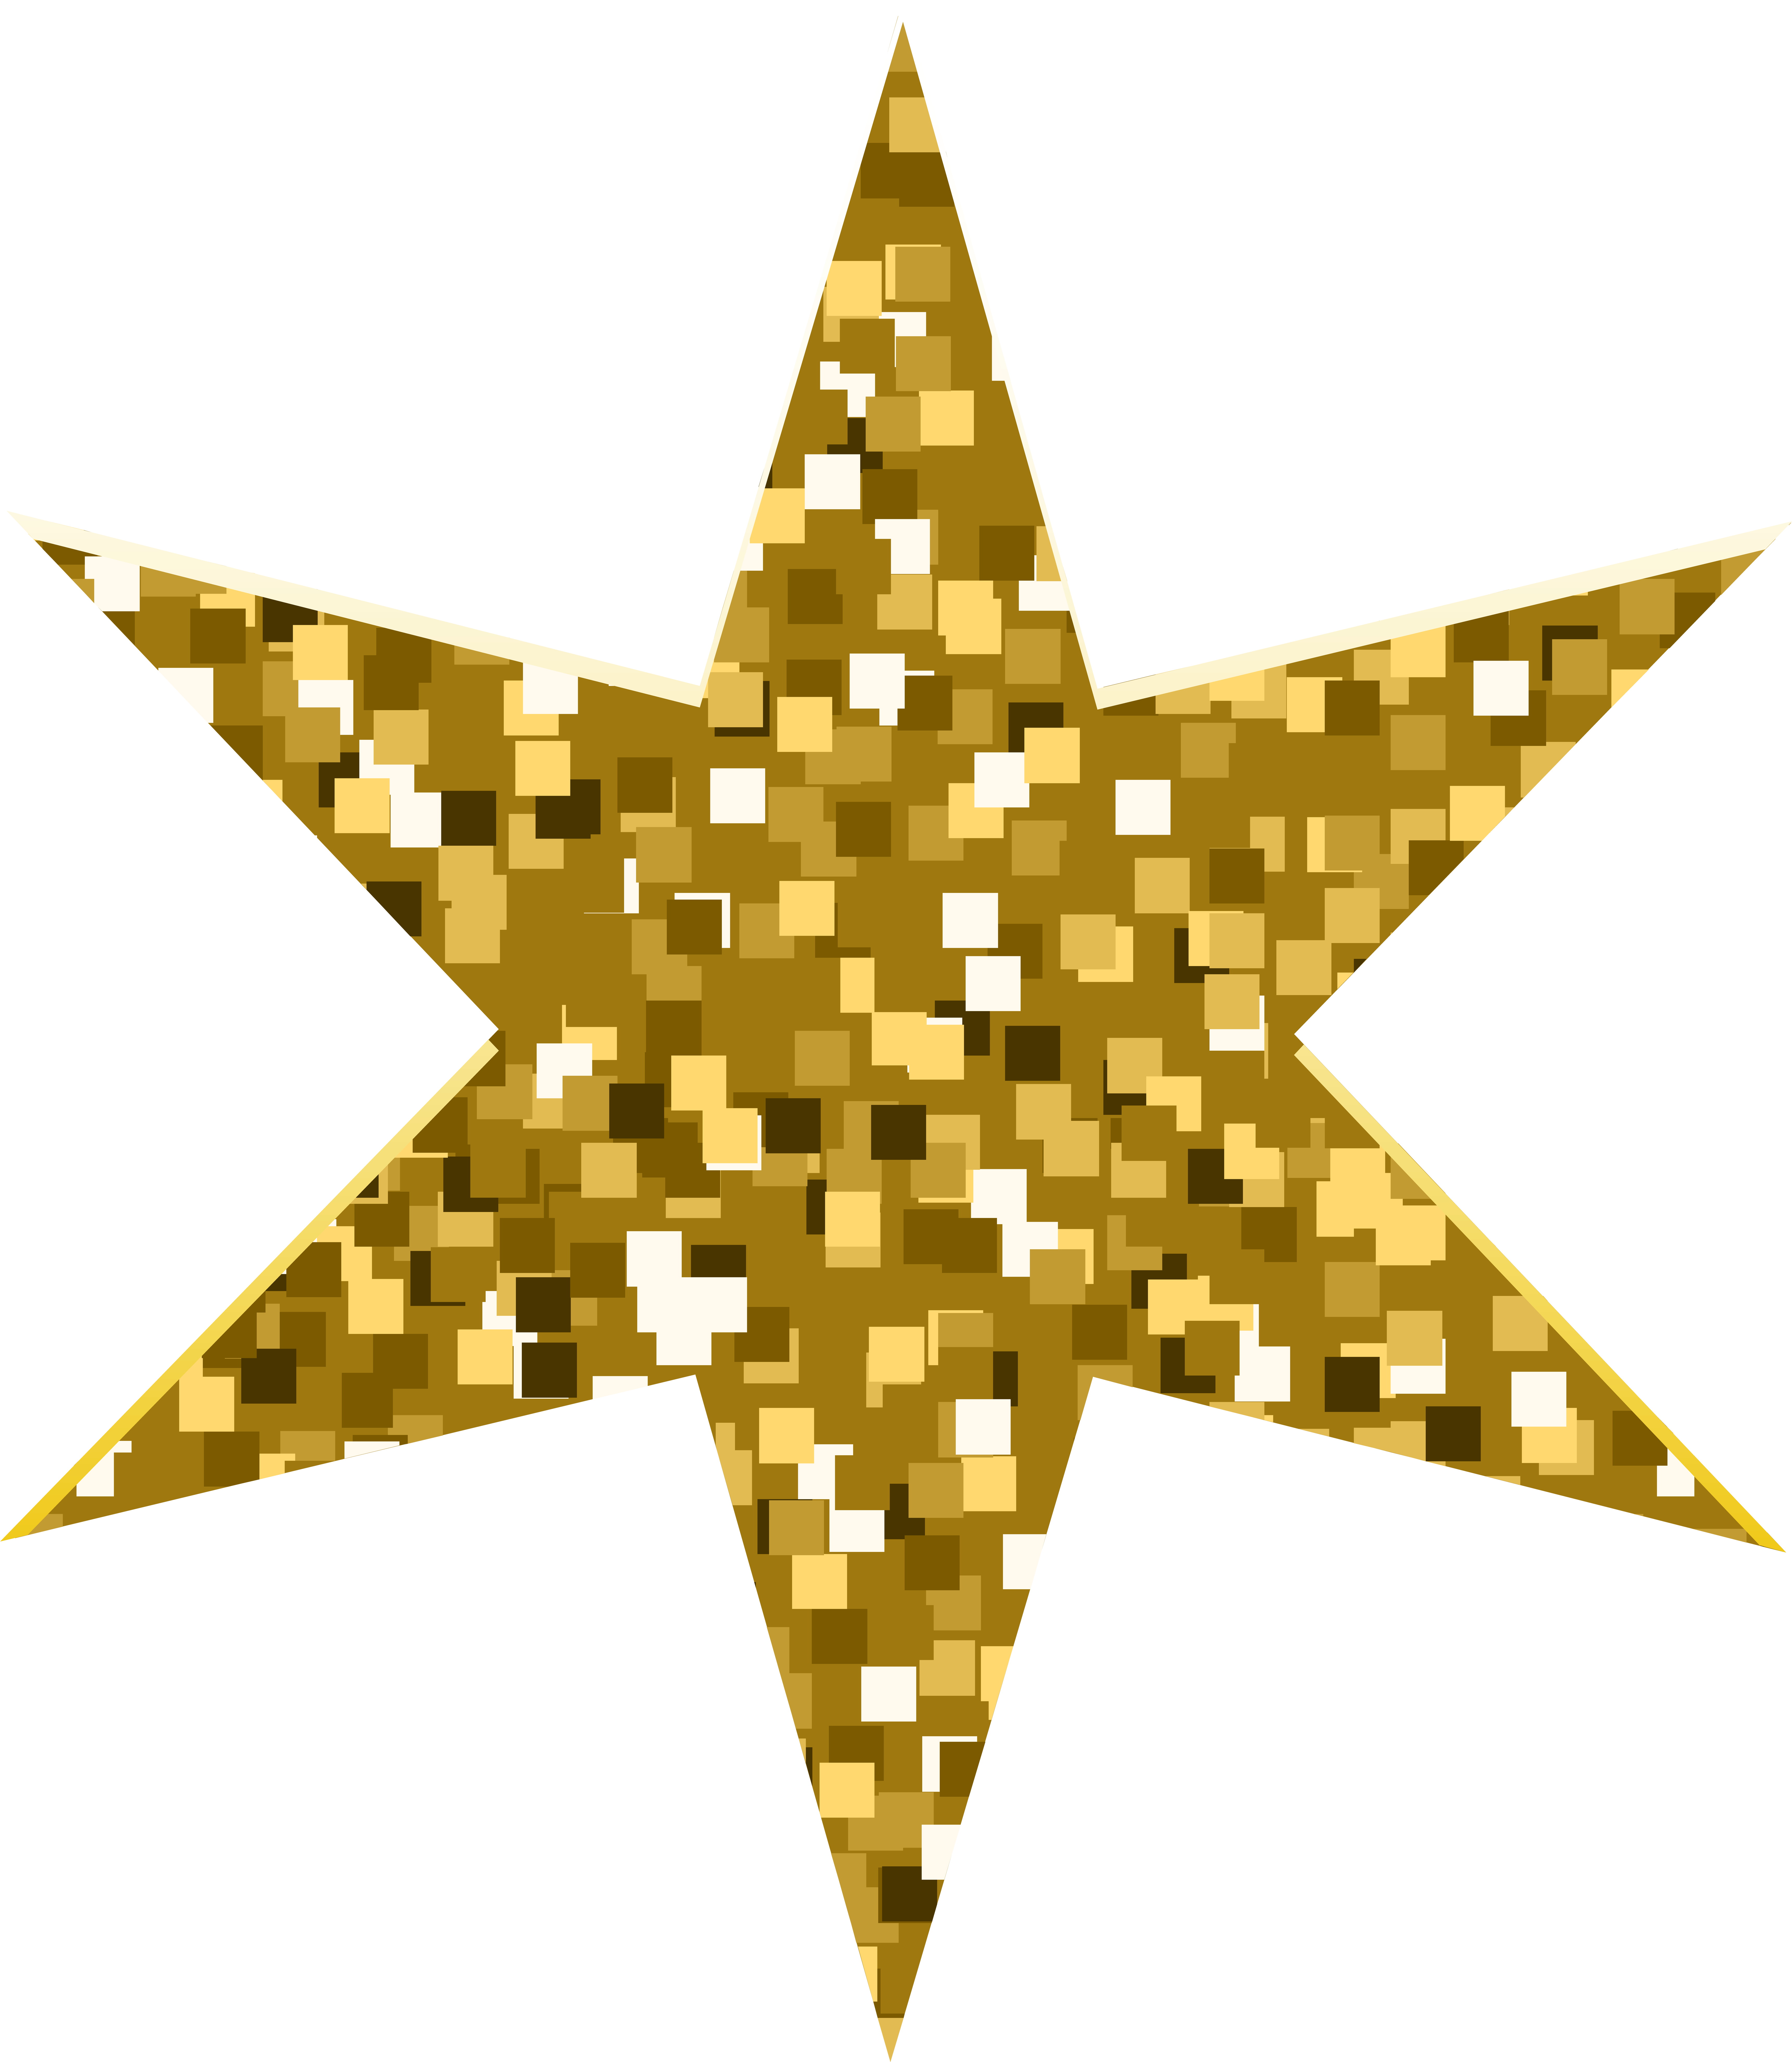 A Gold Star With Squares On It